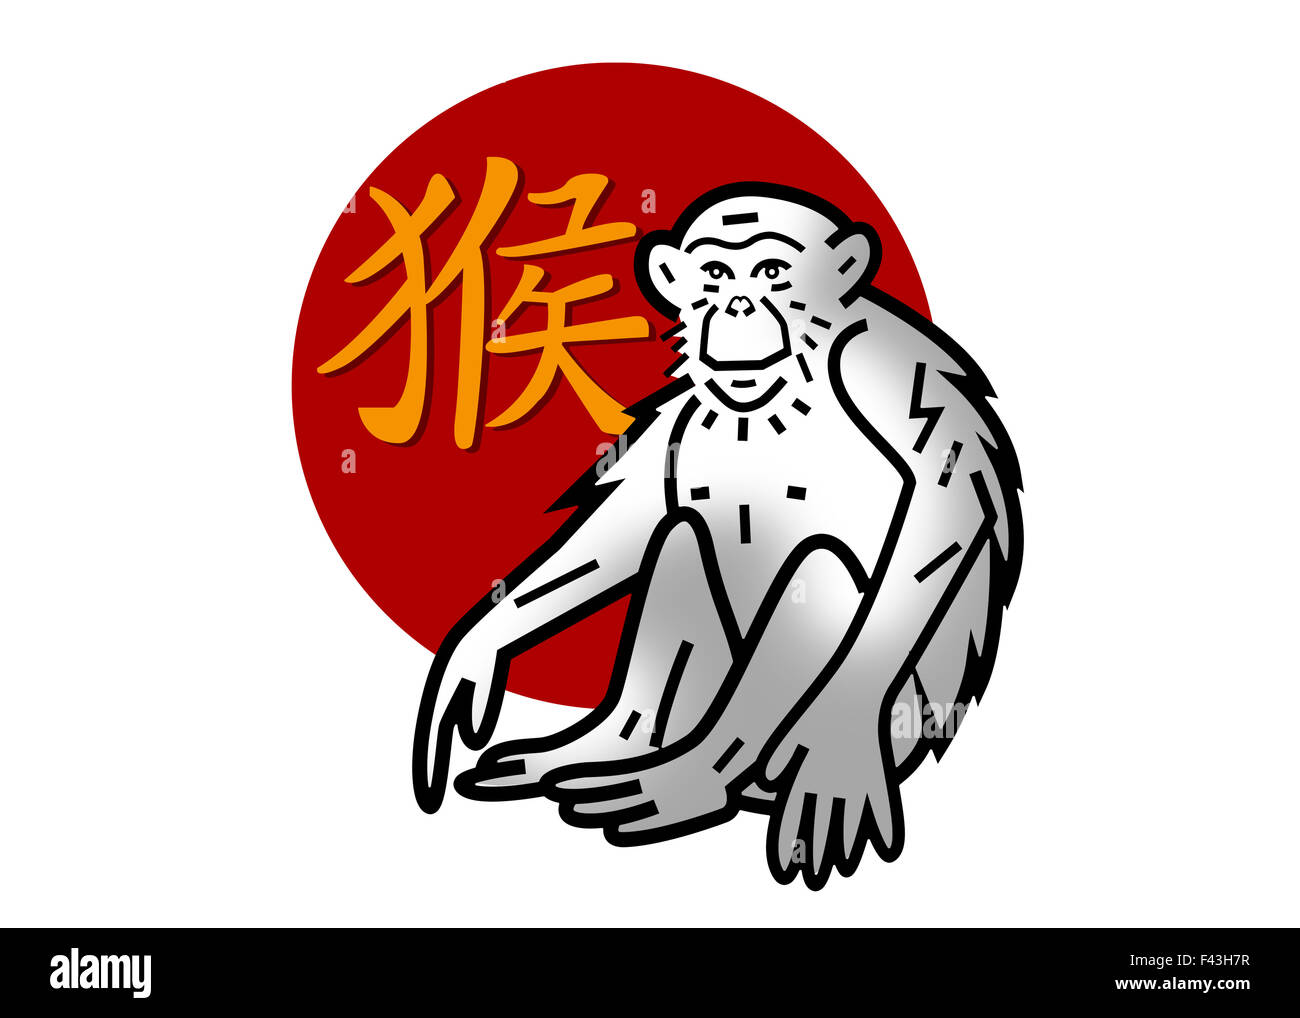 Chinese zodiac sign for year of the monkey Stock Photo